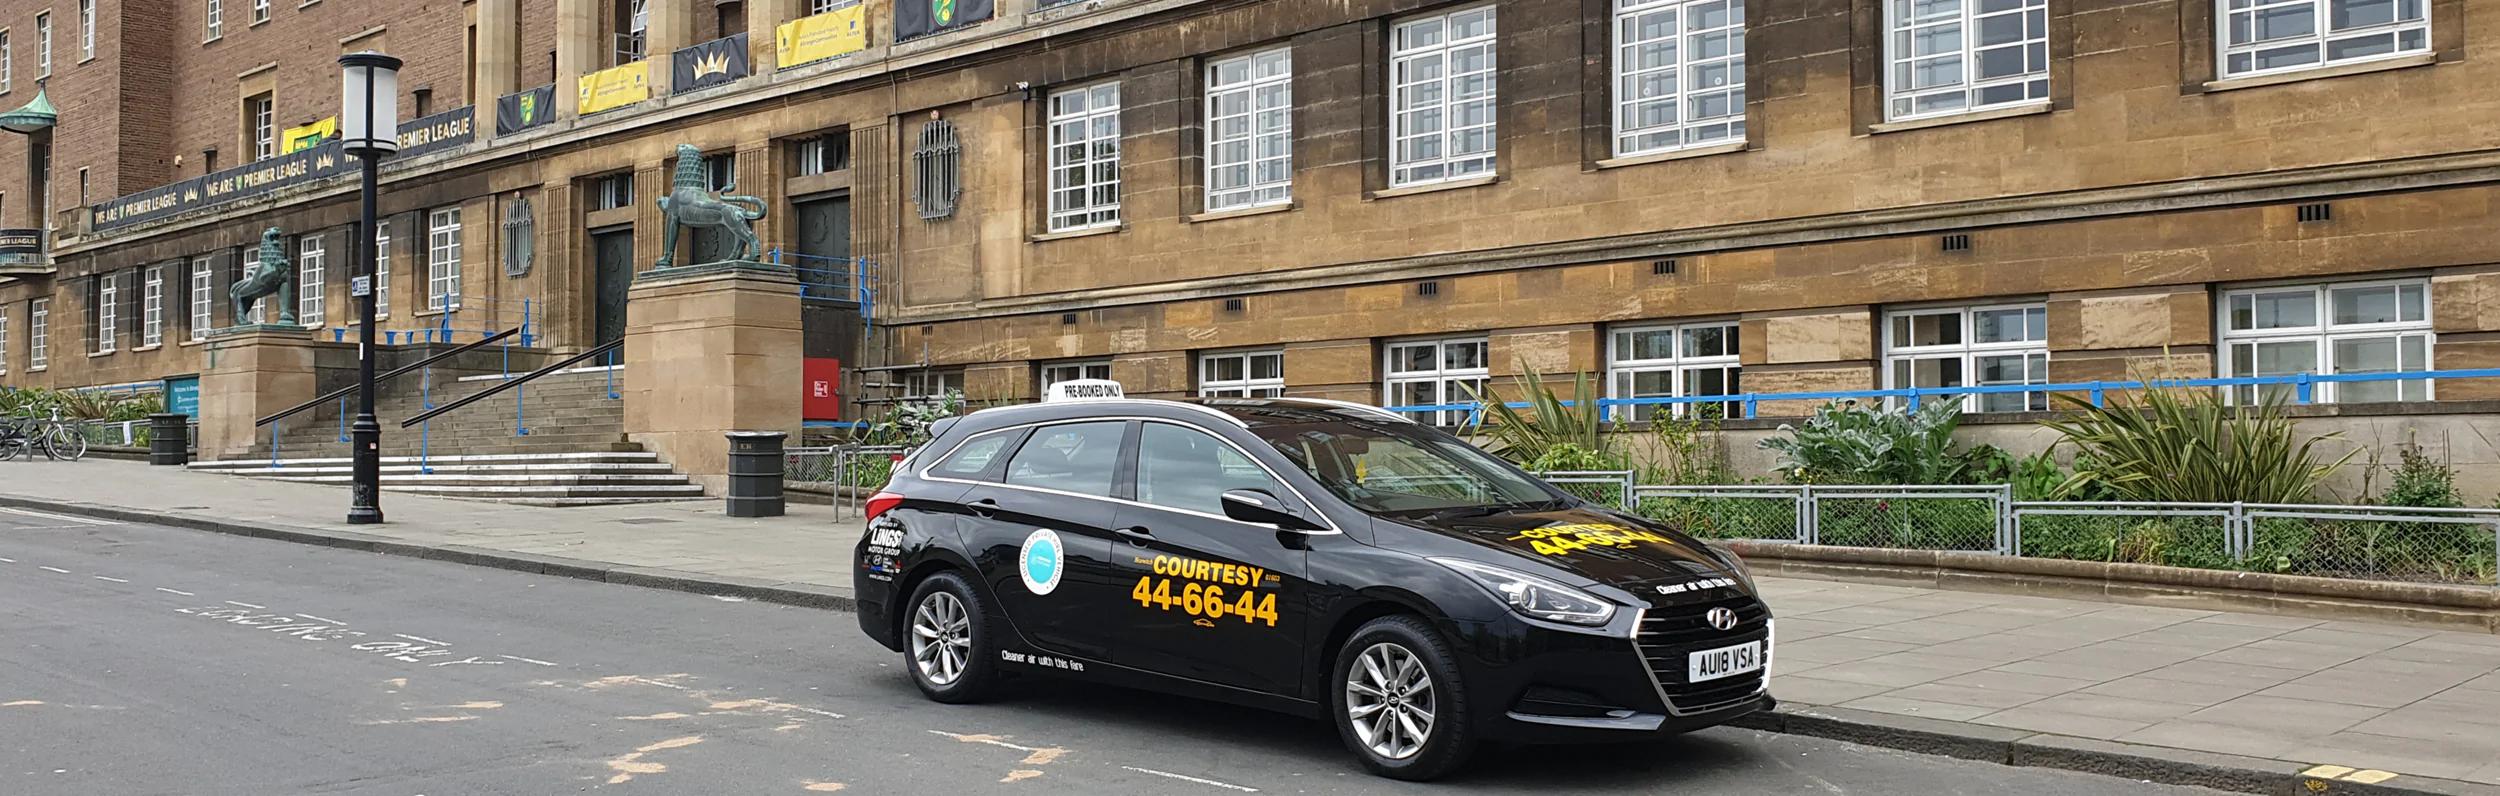 norwich taxi companies - Does Norwich station have a taxi rank